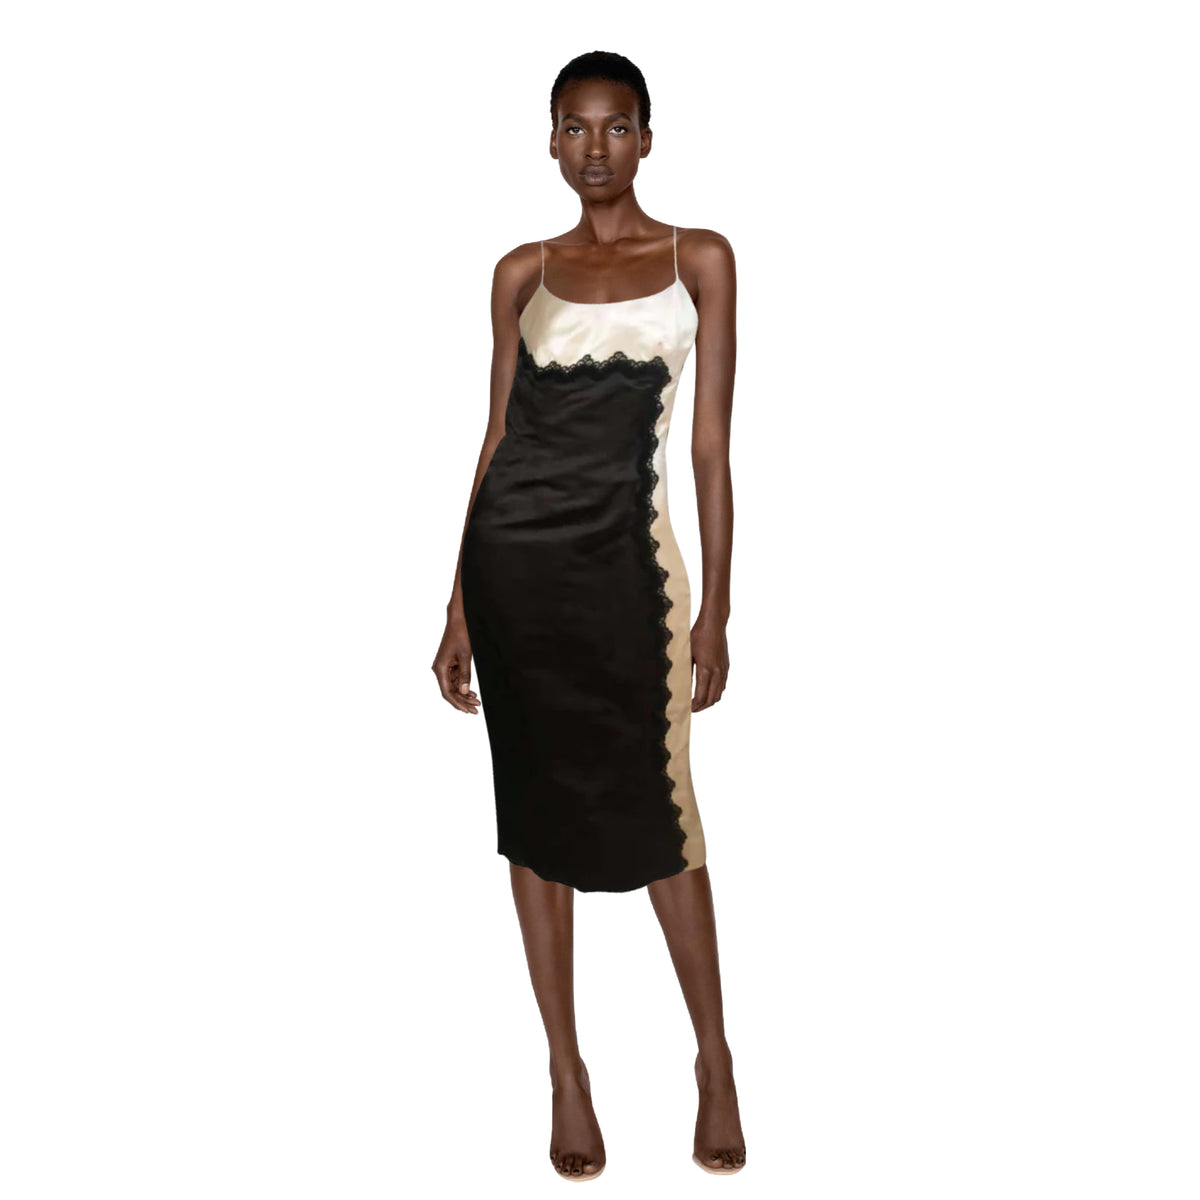 OLEG CASSINI Black and White Cocktail Dress with Lace | US 2/4